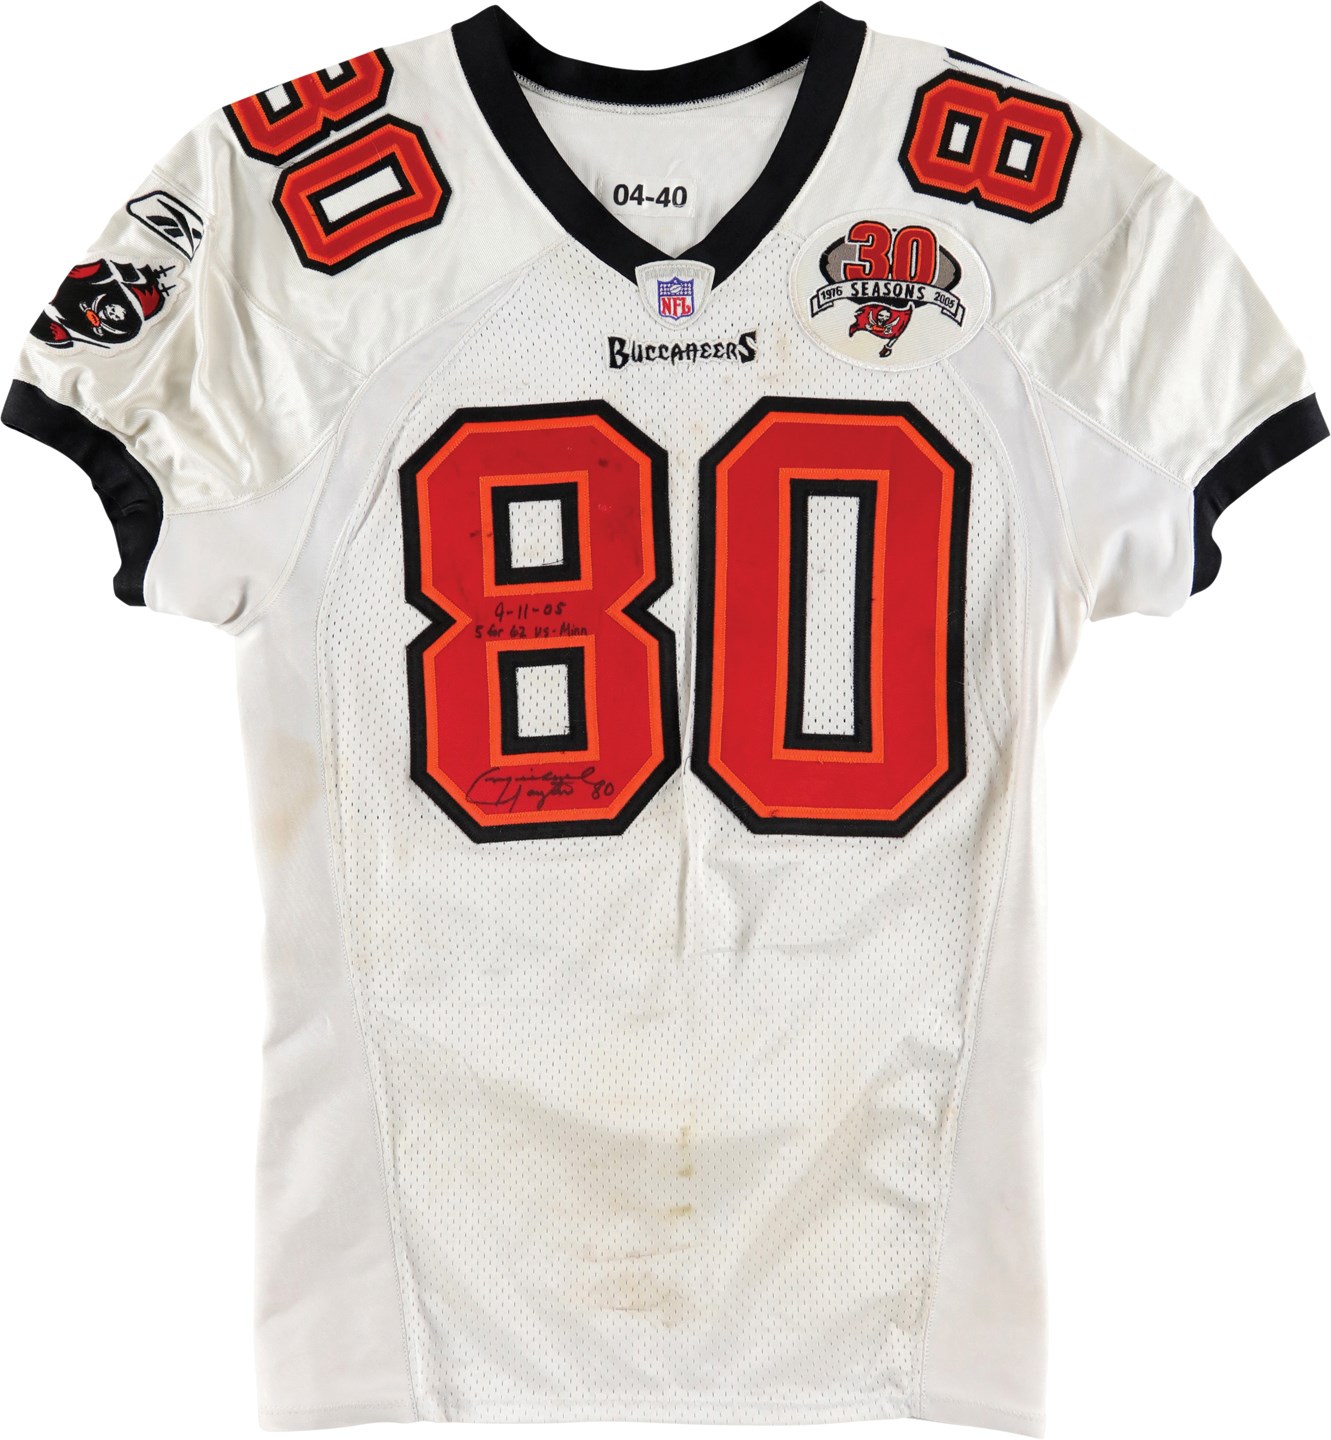 - 9/11/05 Michael Clayton Unwashed Tampa Bay Buccaneers Game Worn Jersey with 30th Anniversary Patch